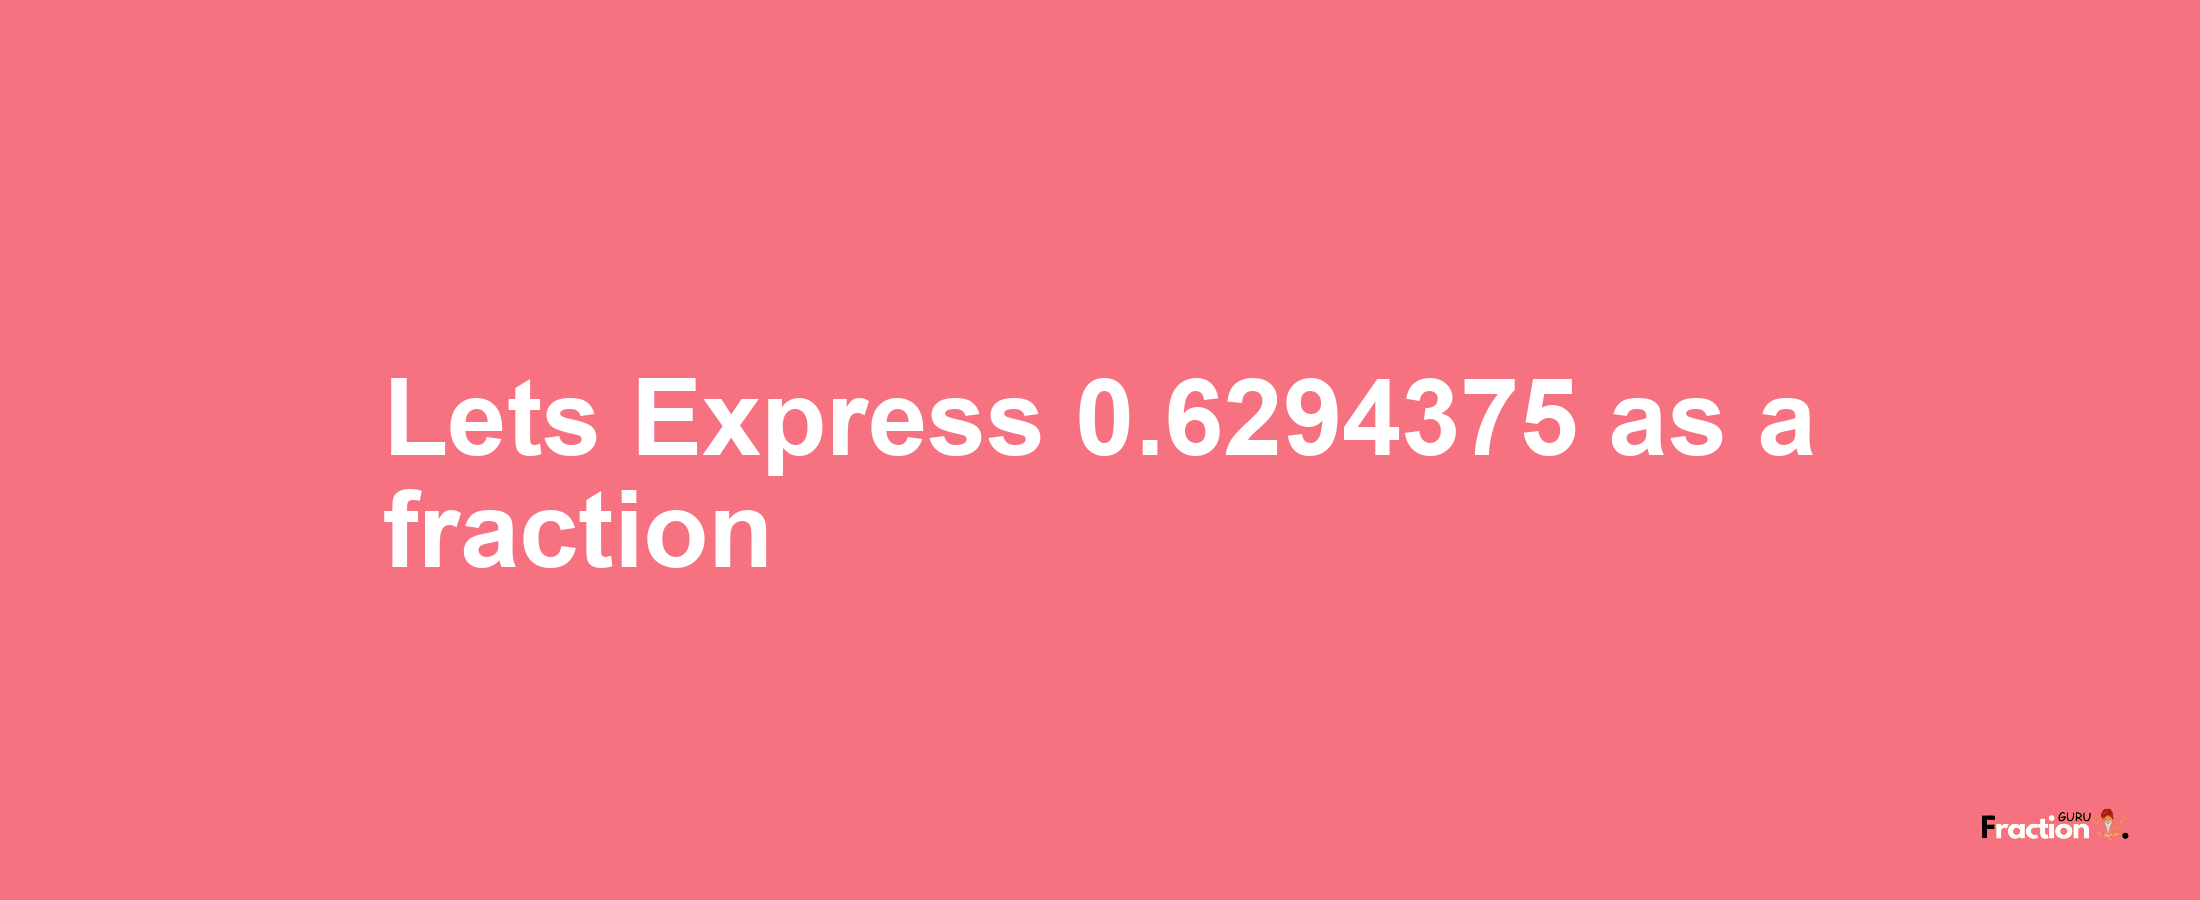 Lets Express 0.6294375 as afraction